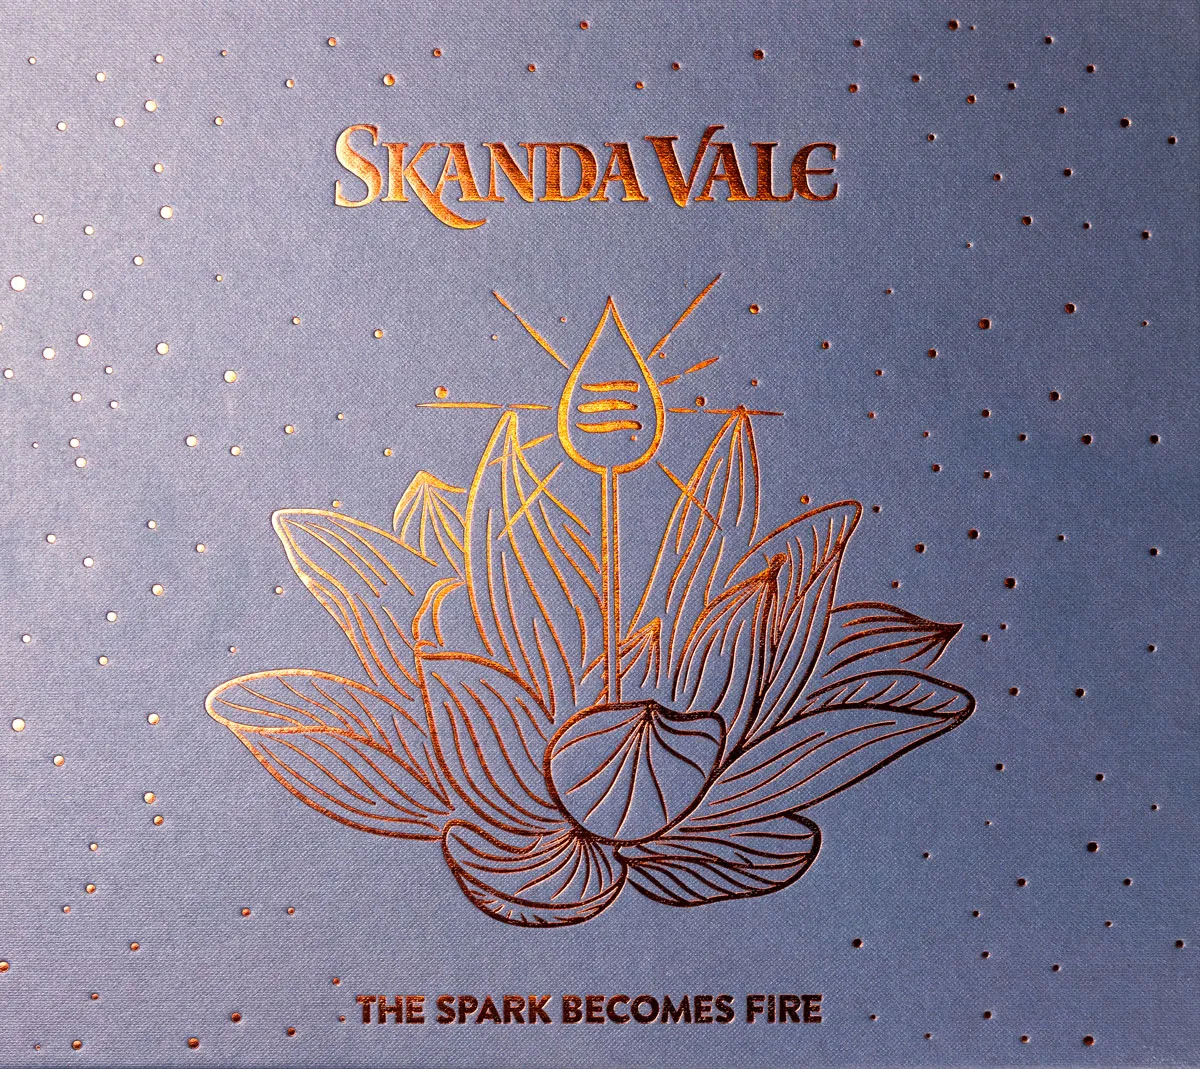 Front cover of the Skanda Vale book 'The Spark Becomes Fire'